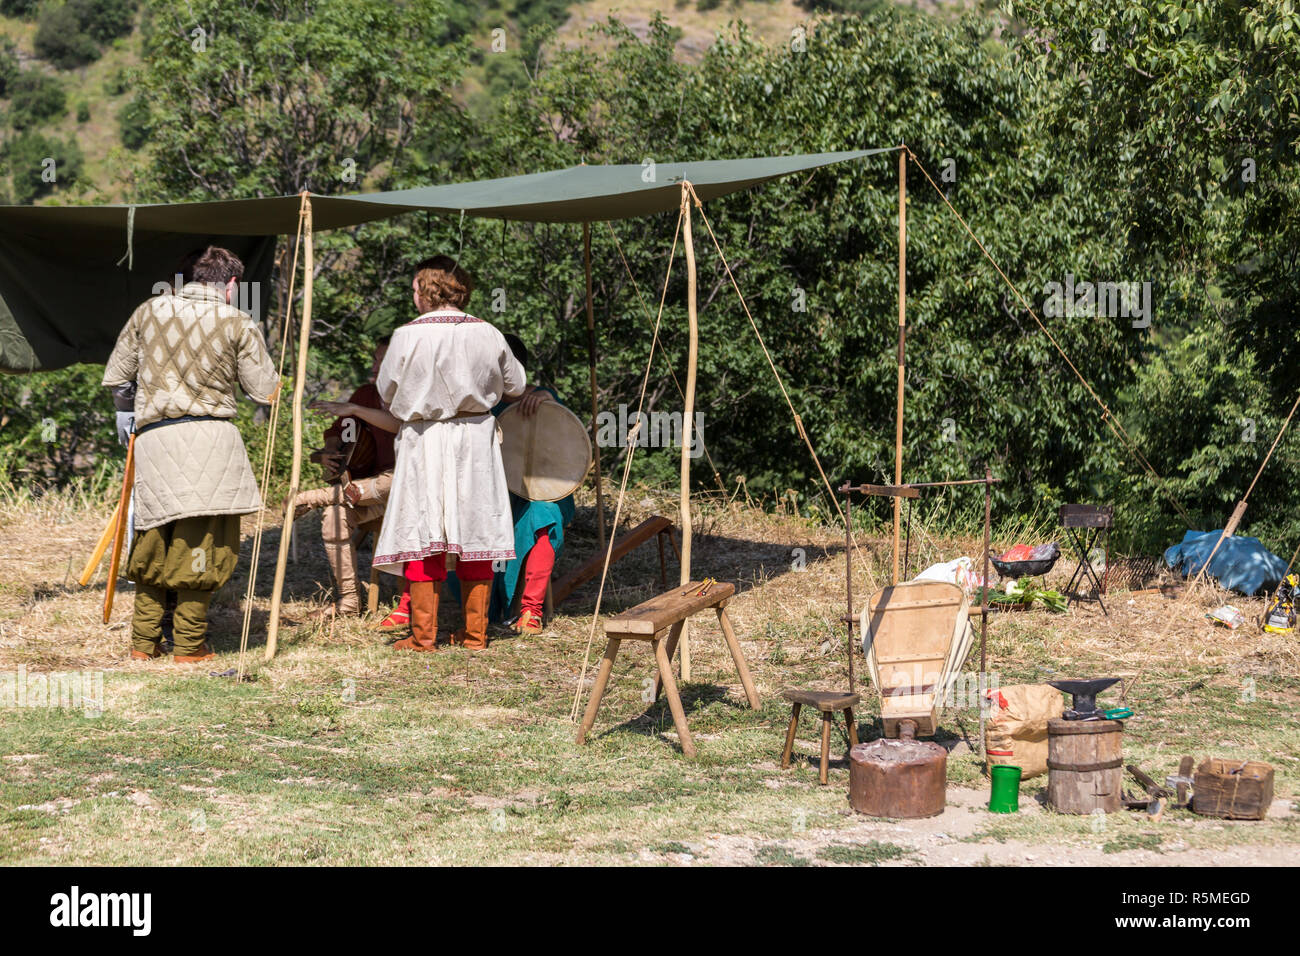 ASENVOGRAD, BULGARIA - JUNE 25, 2016 - Medieval fair in Asenovgrad recreating the life of Bulgarians during the Middle ages. Stock Photo